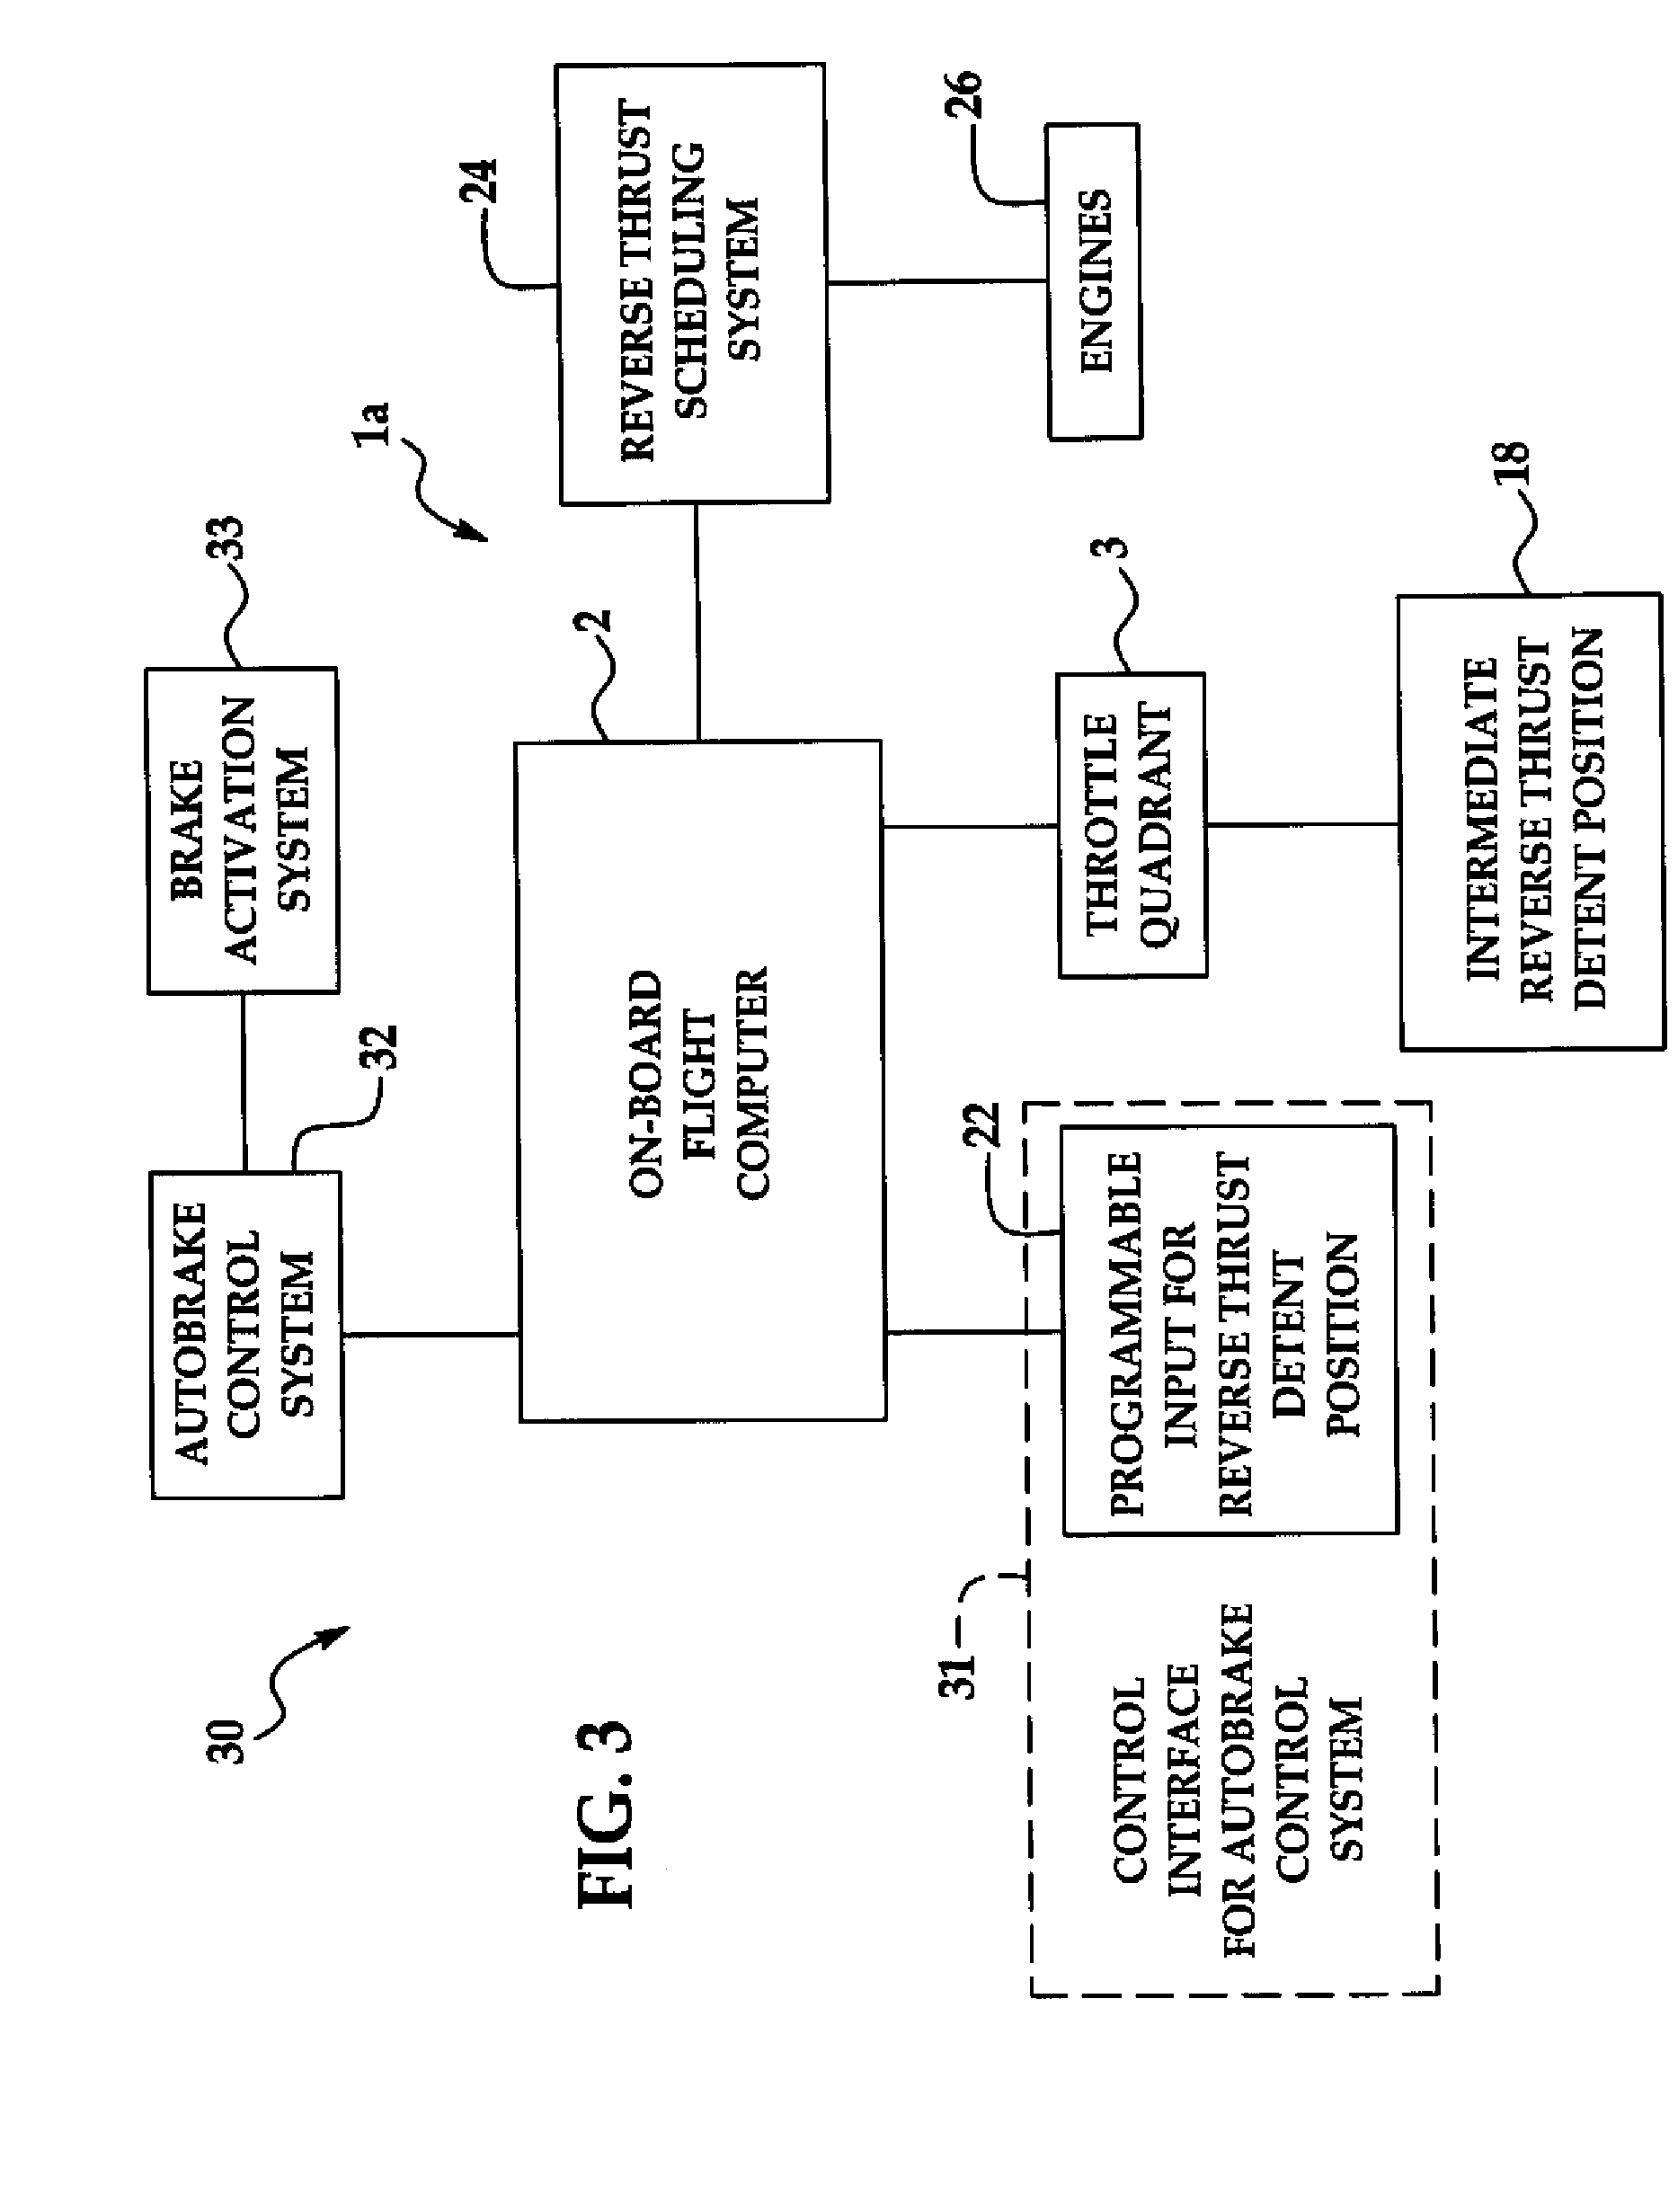 Programmable reverse thrust detent system and method